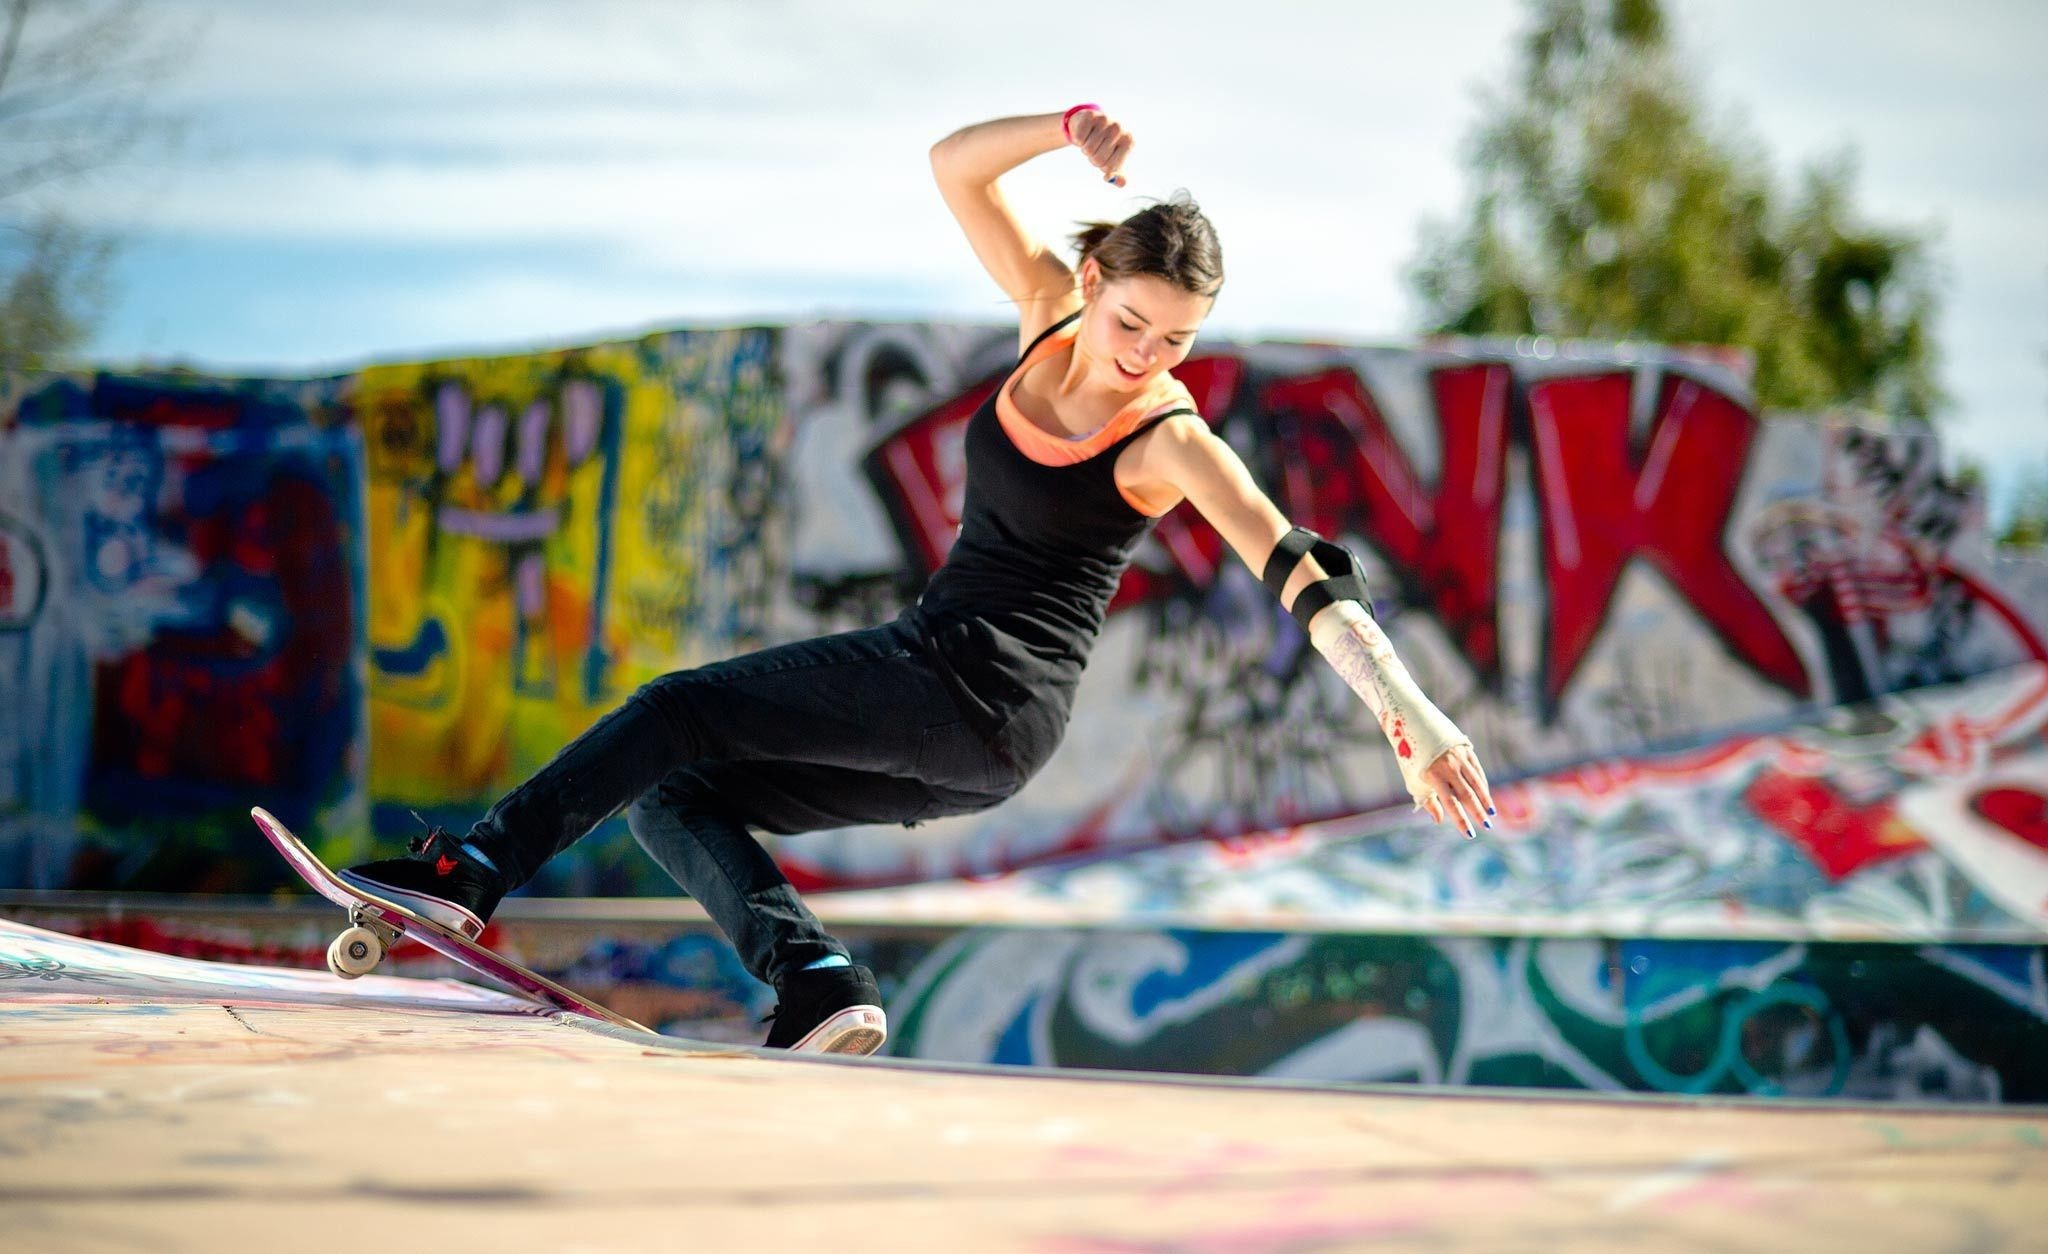 SKATEBOARDS FOR BEGINNERS – THINGS TO KEEP IN MIND